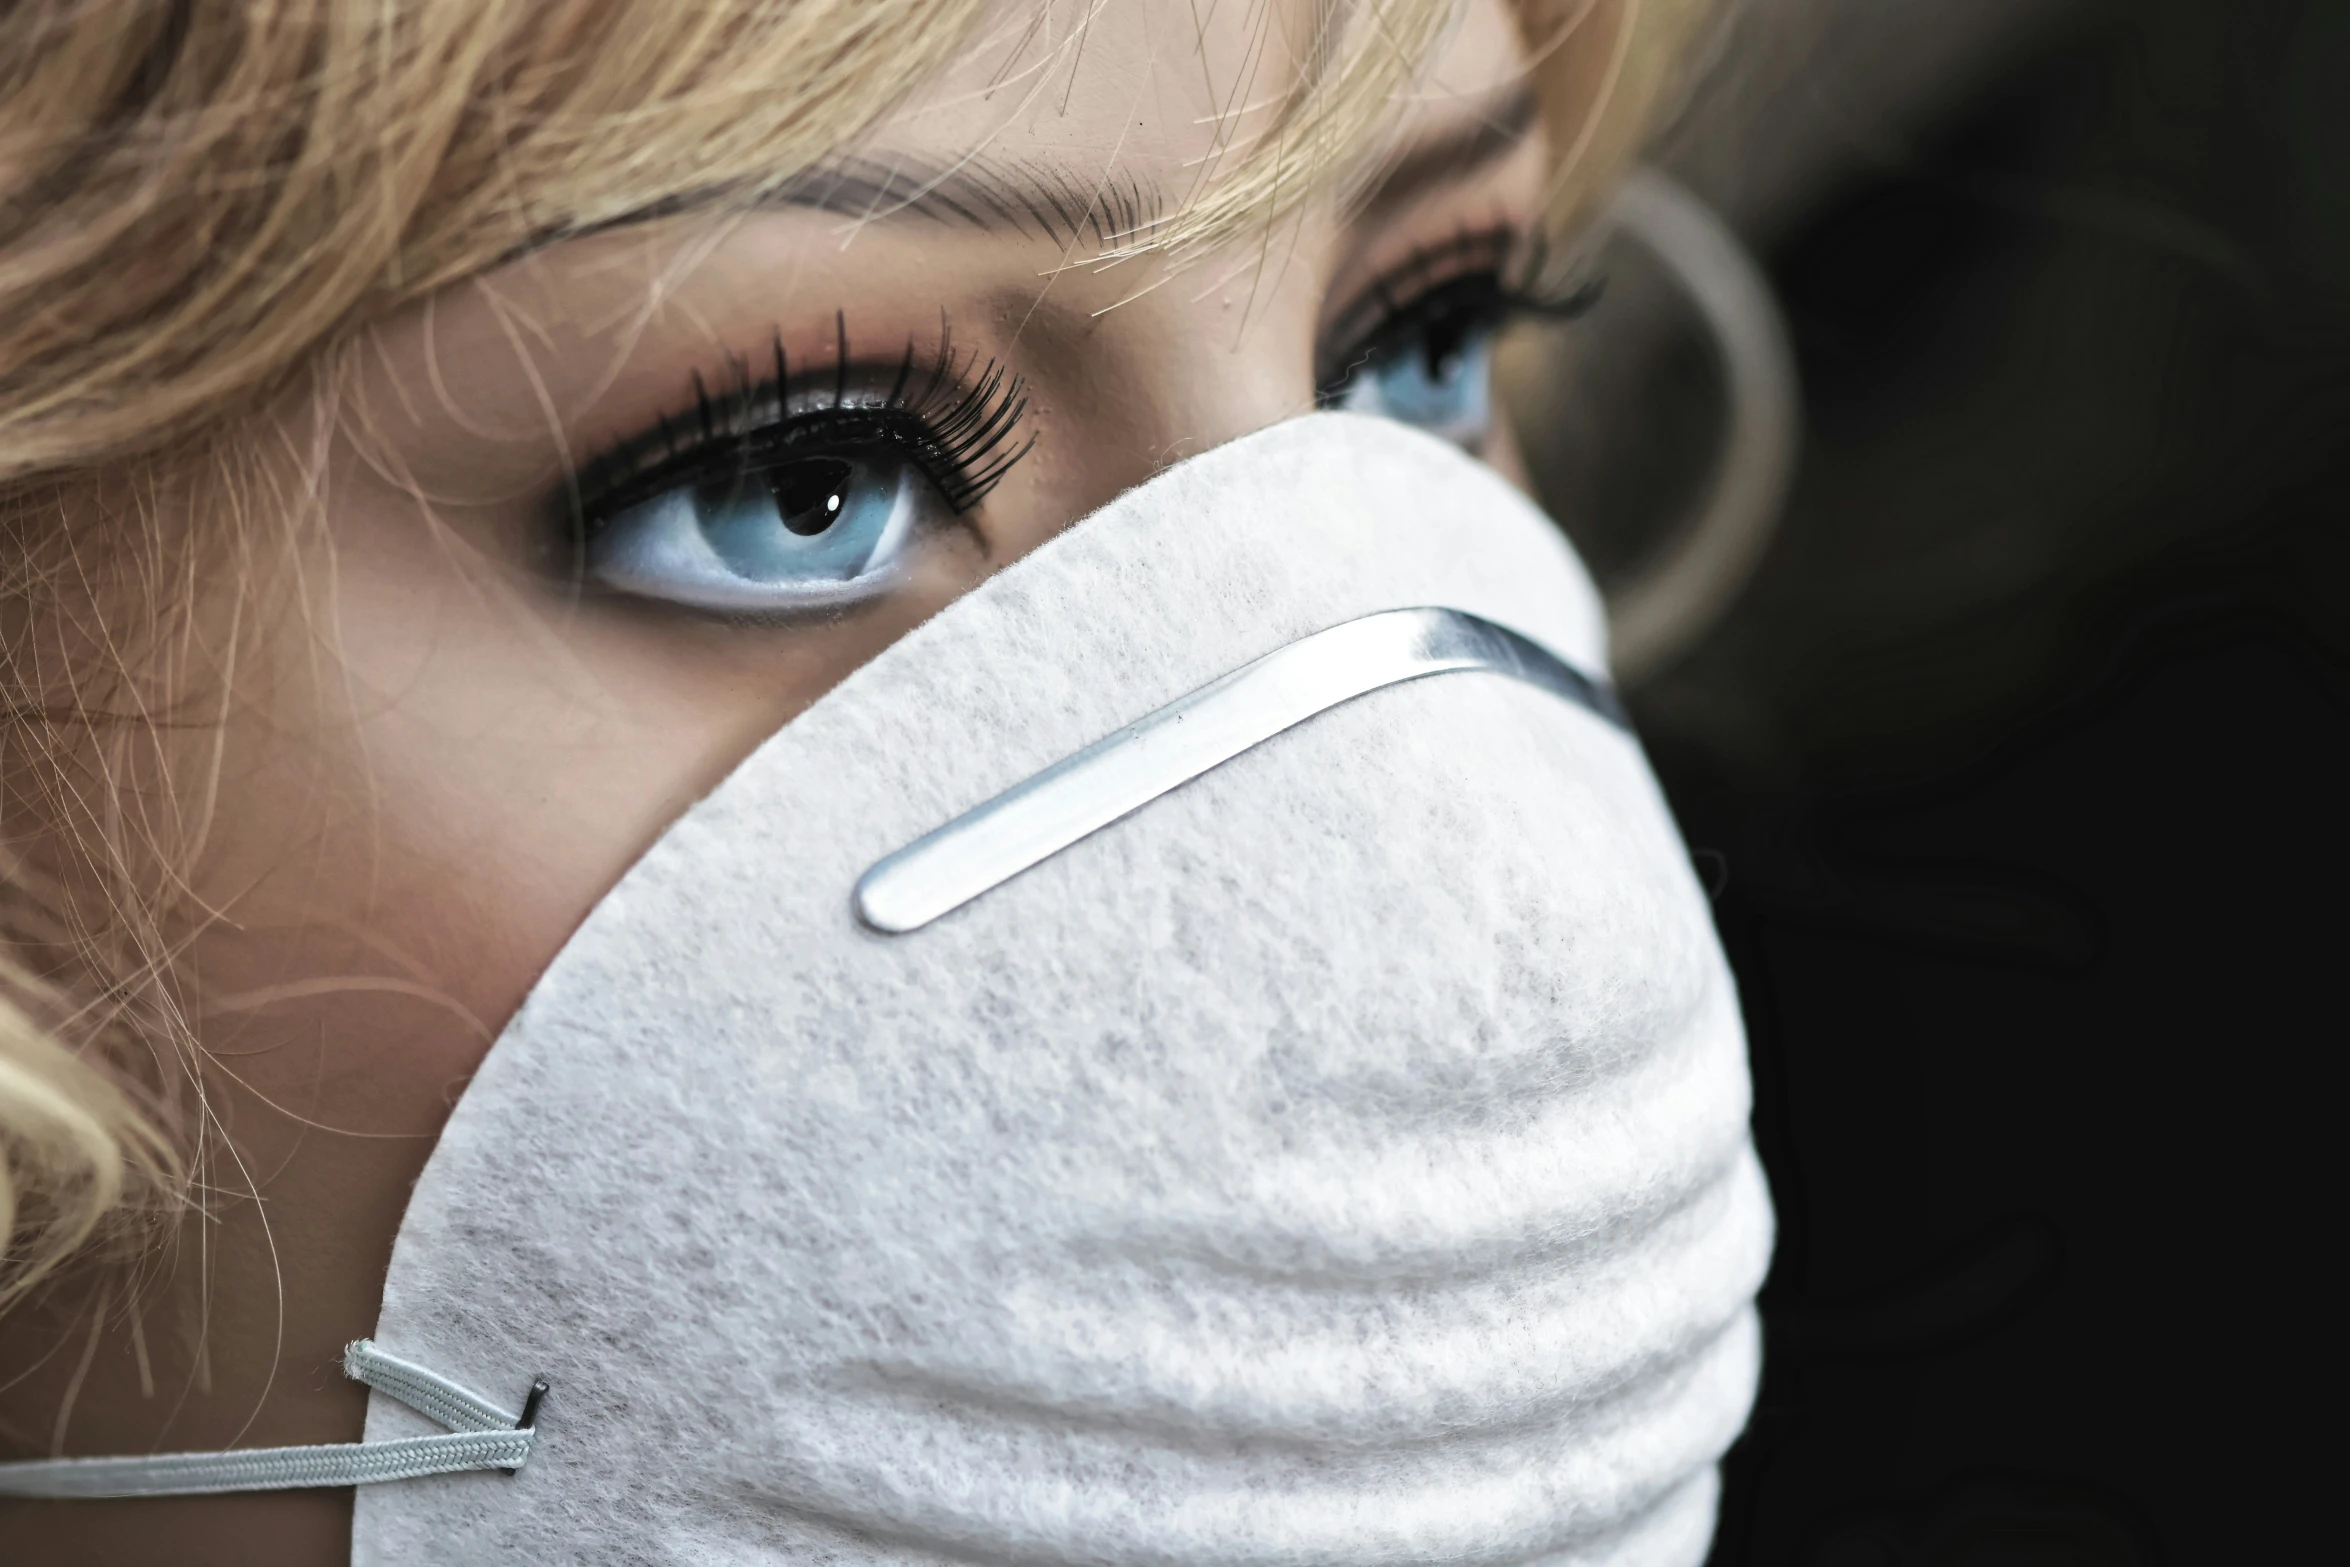 blue eyes are wearing a mask to prevent it from smogging